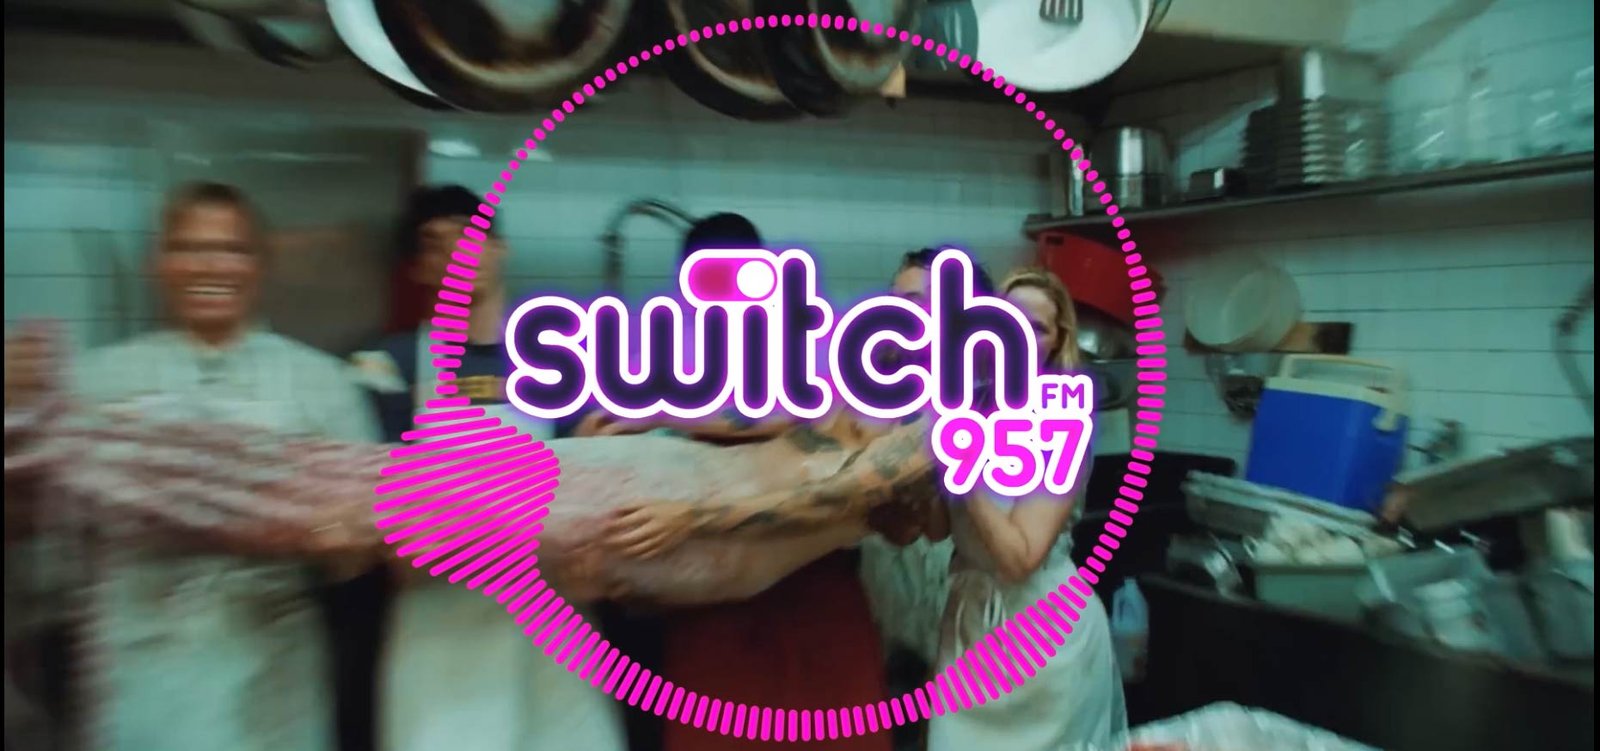 Harry Styles - Music For a Sushi Restaurant (switch fm speed intro)  